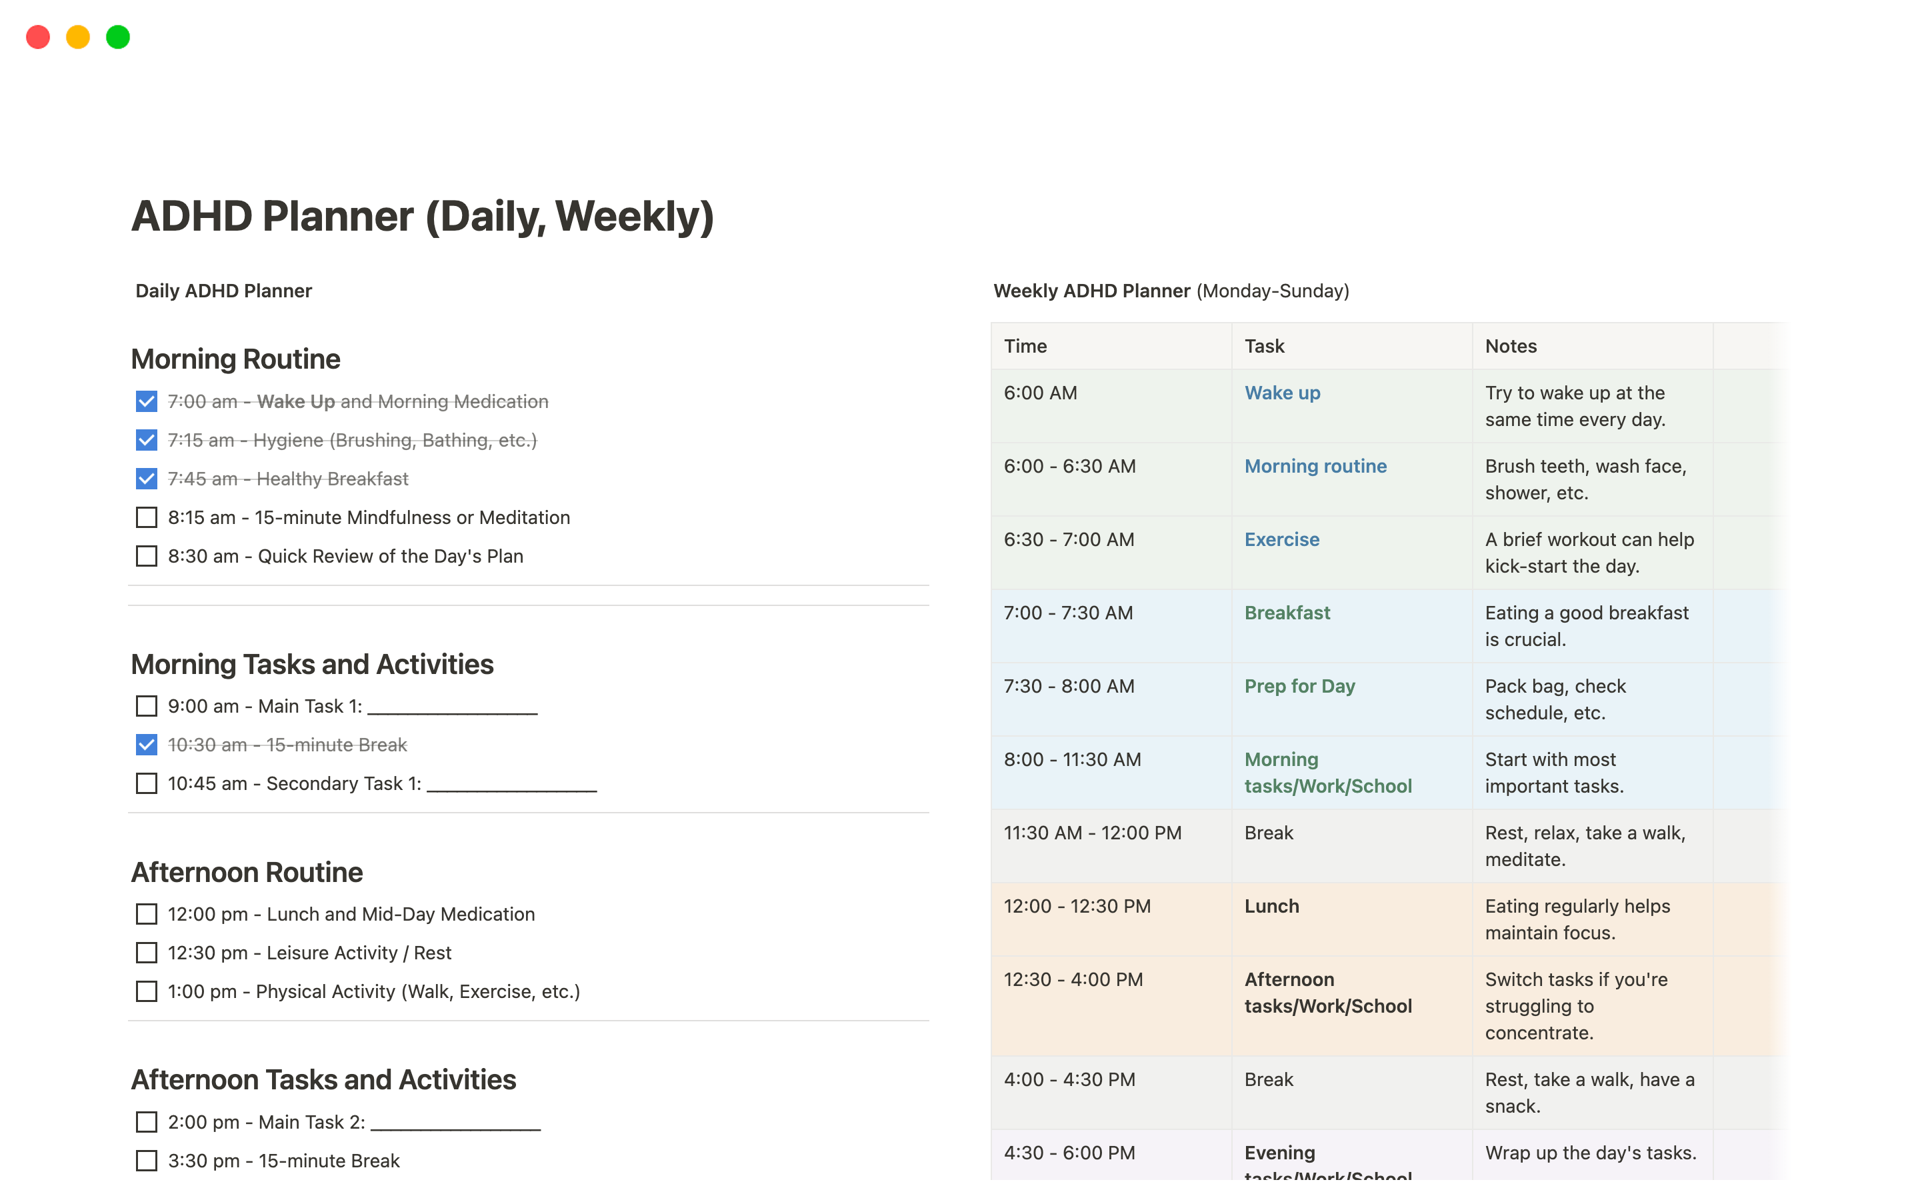 ADHD daily and weekly planner templates aid in managing tasks, structuring routines, and enhancing focus and productivity.